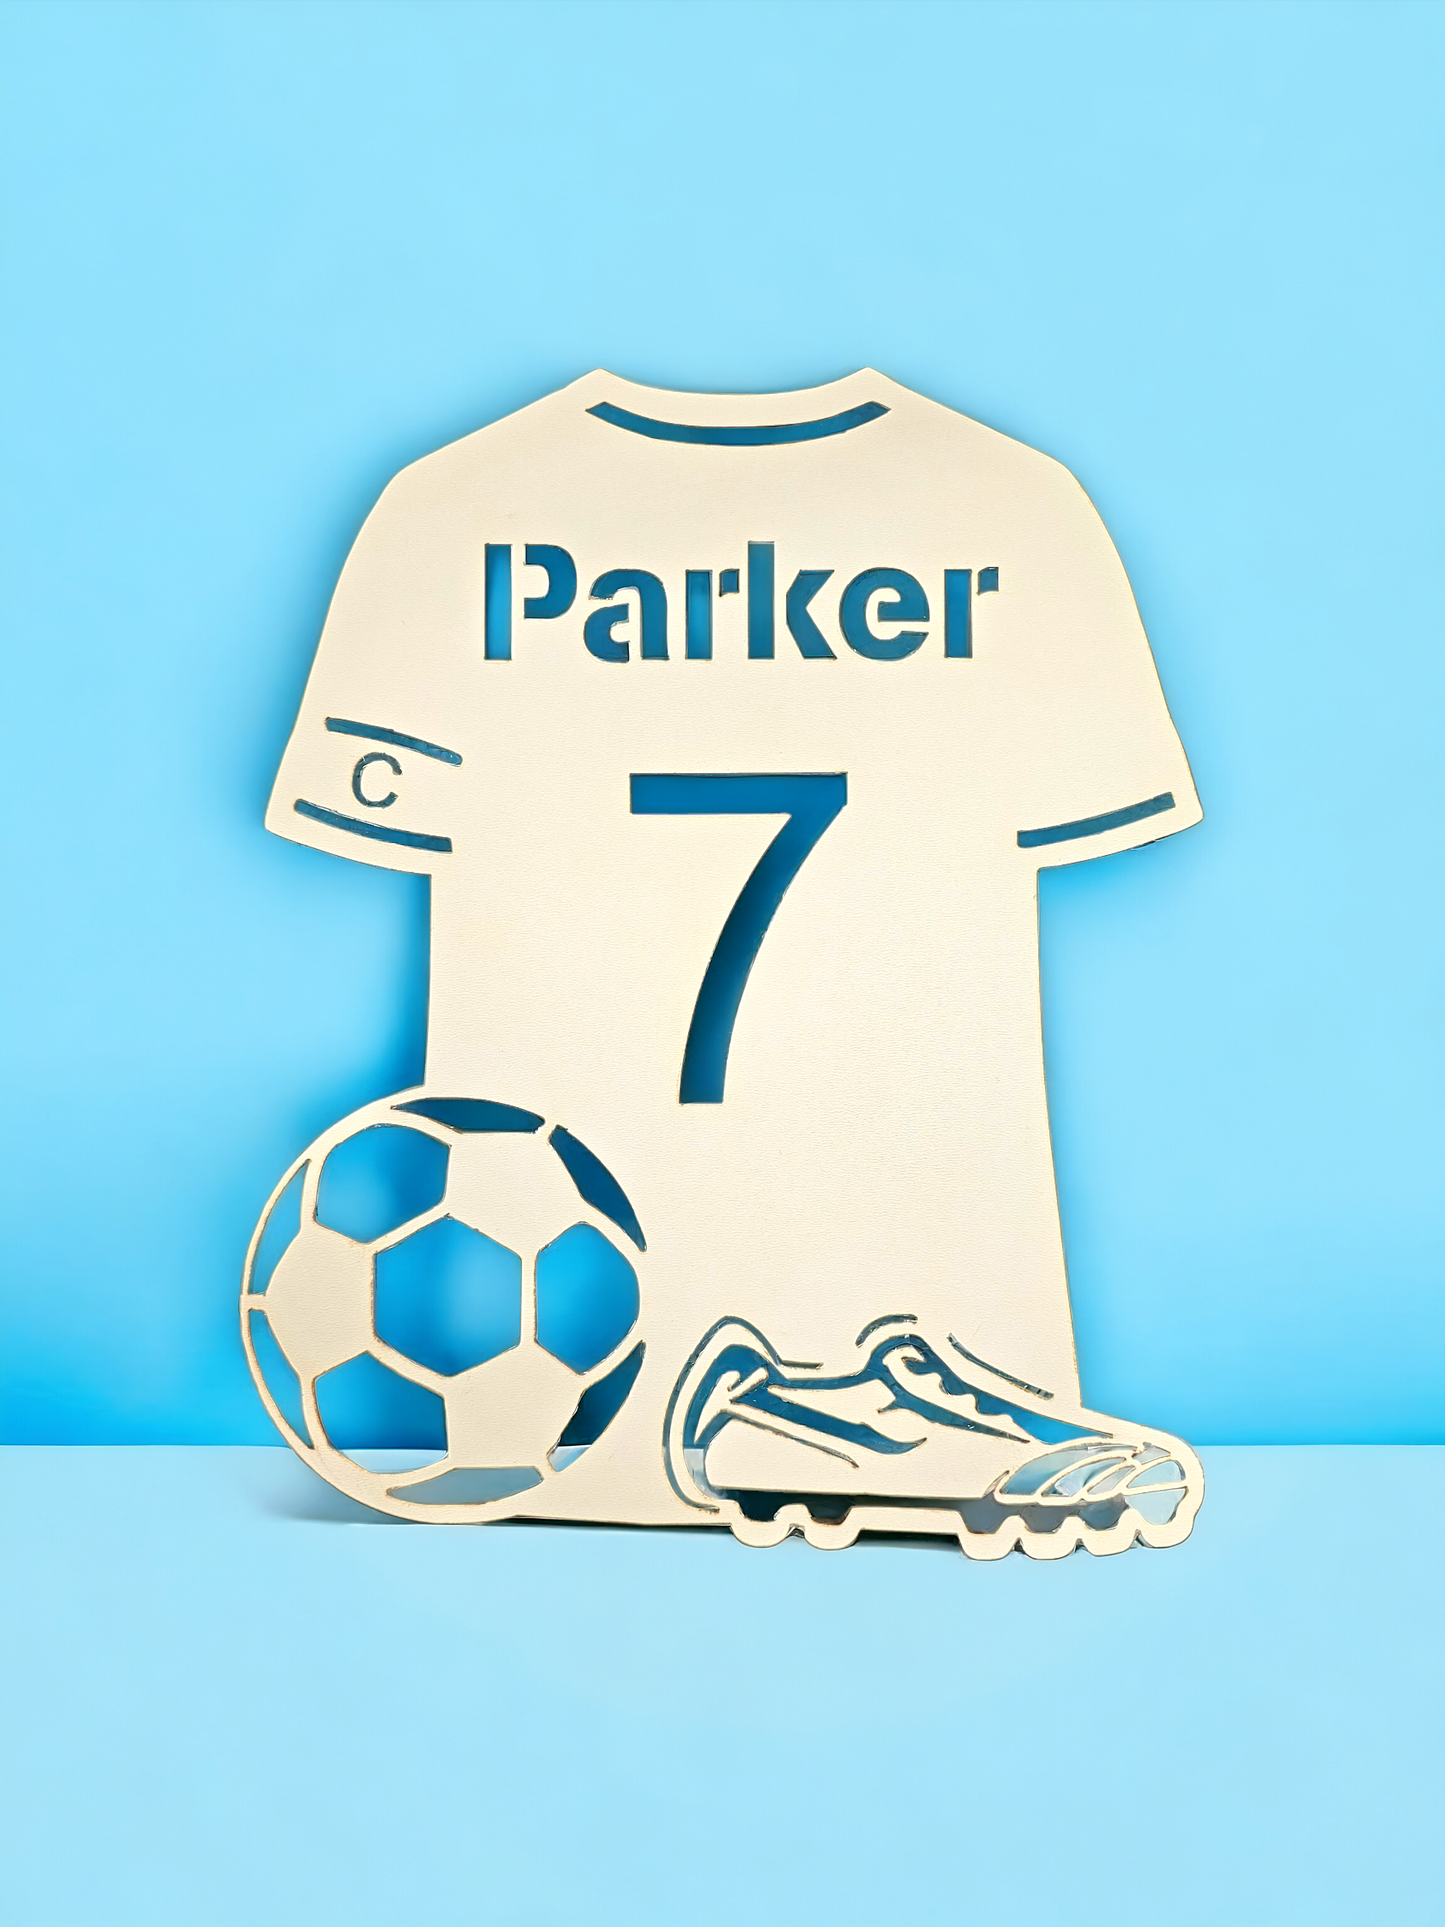 Personalised football Jersey door and wall plaque